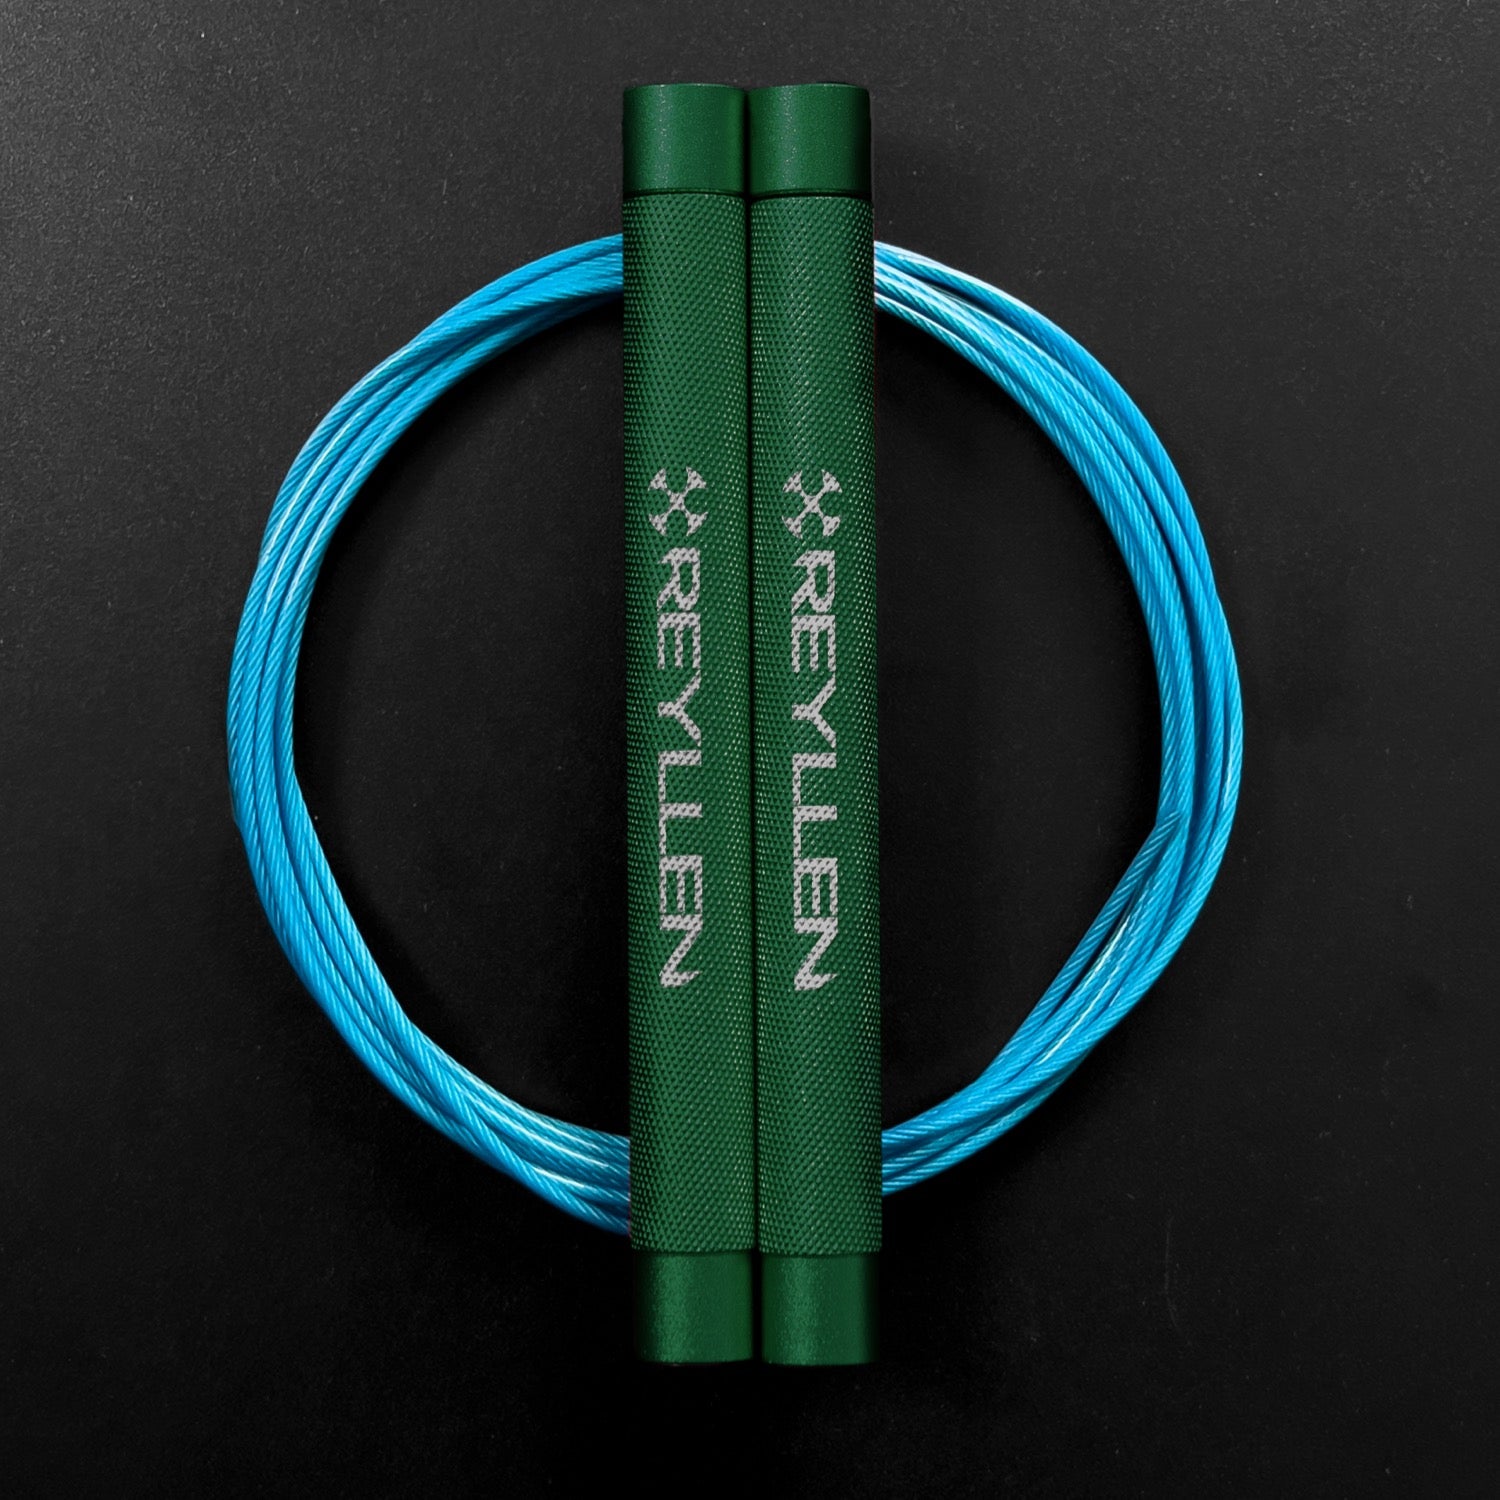 Reyllen Flare Mx Speed Skipping Jump Rope - Aluminium Handles - green with blue nylon coated cable